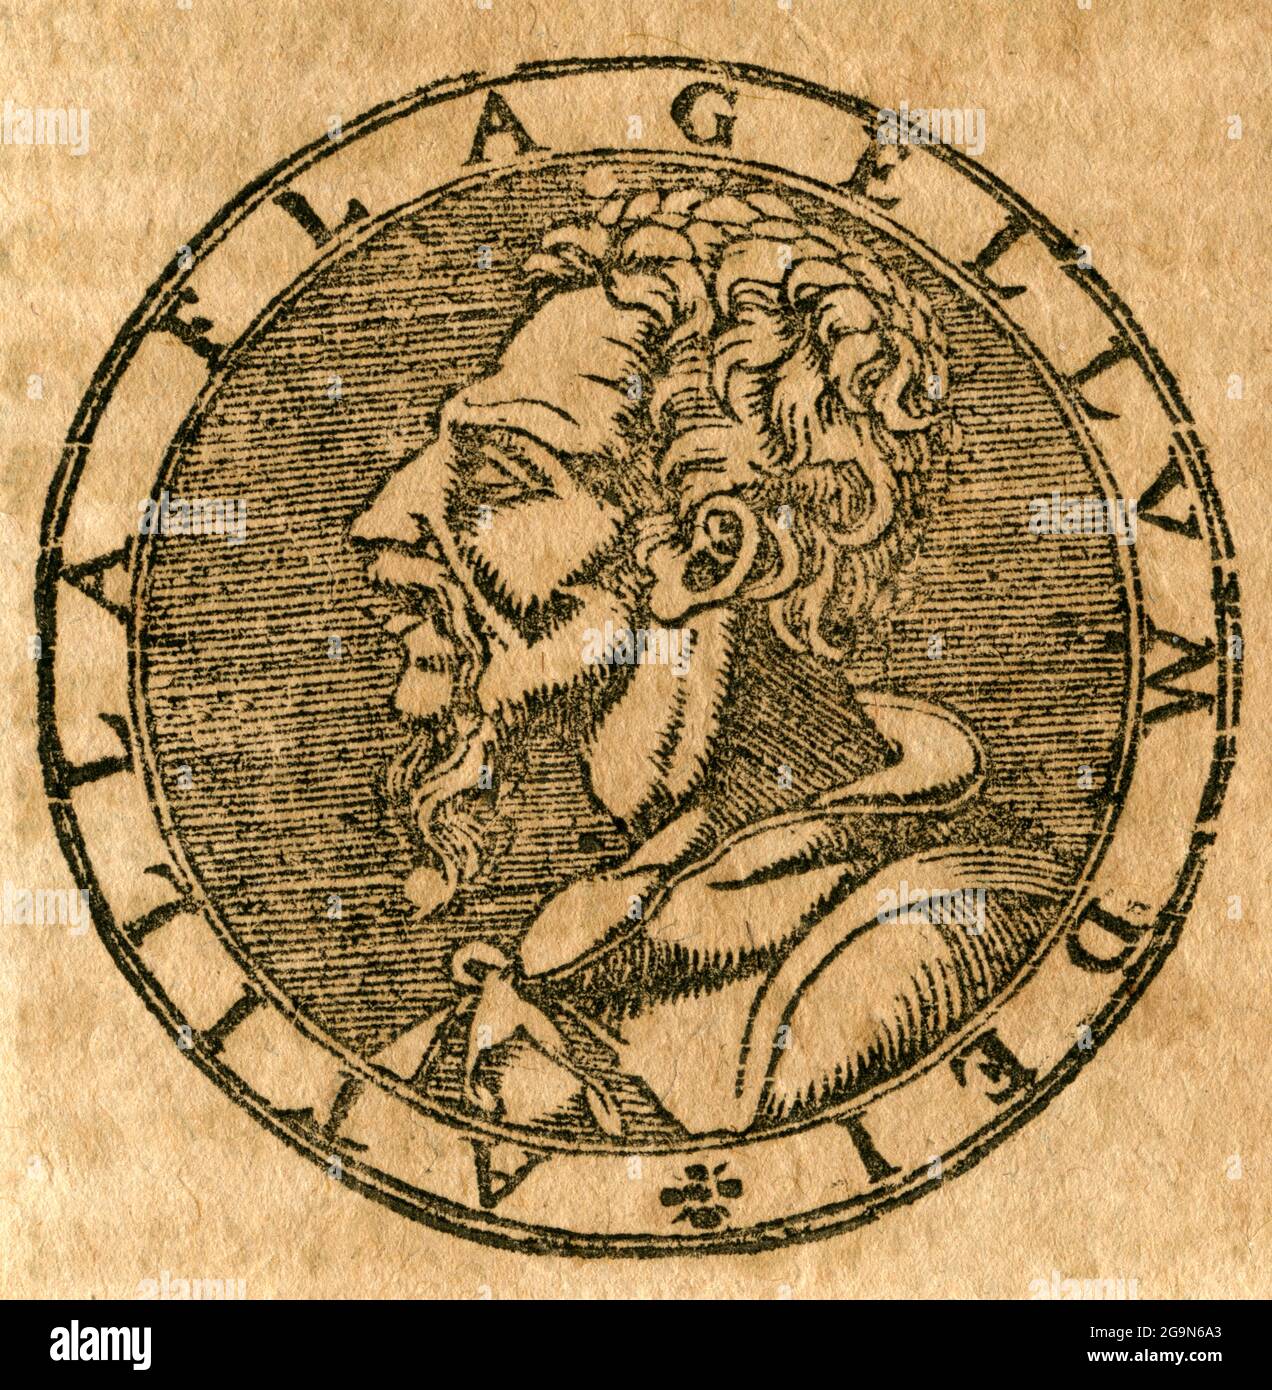 Europe, Hungary, Attila, ruler of the Huns, portrait from: 'Cosmographia', by Sebastian Münster, ARTIST'S COPYRIGHT HAS NOT TO BE CLEARED Stock Photo